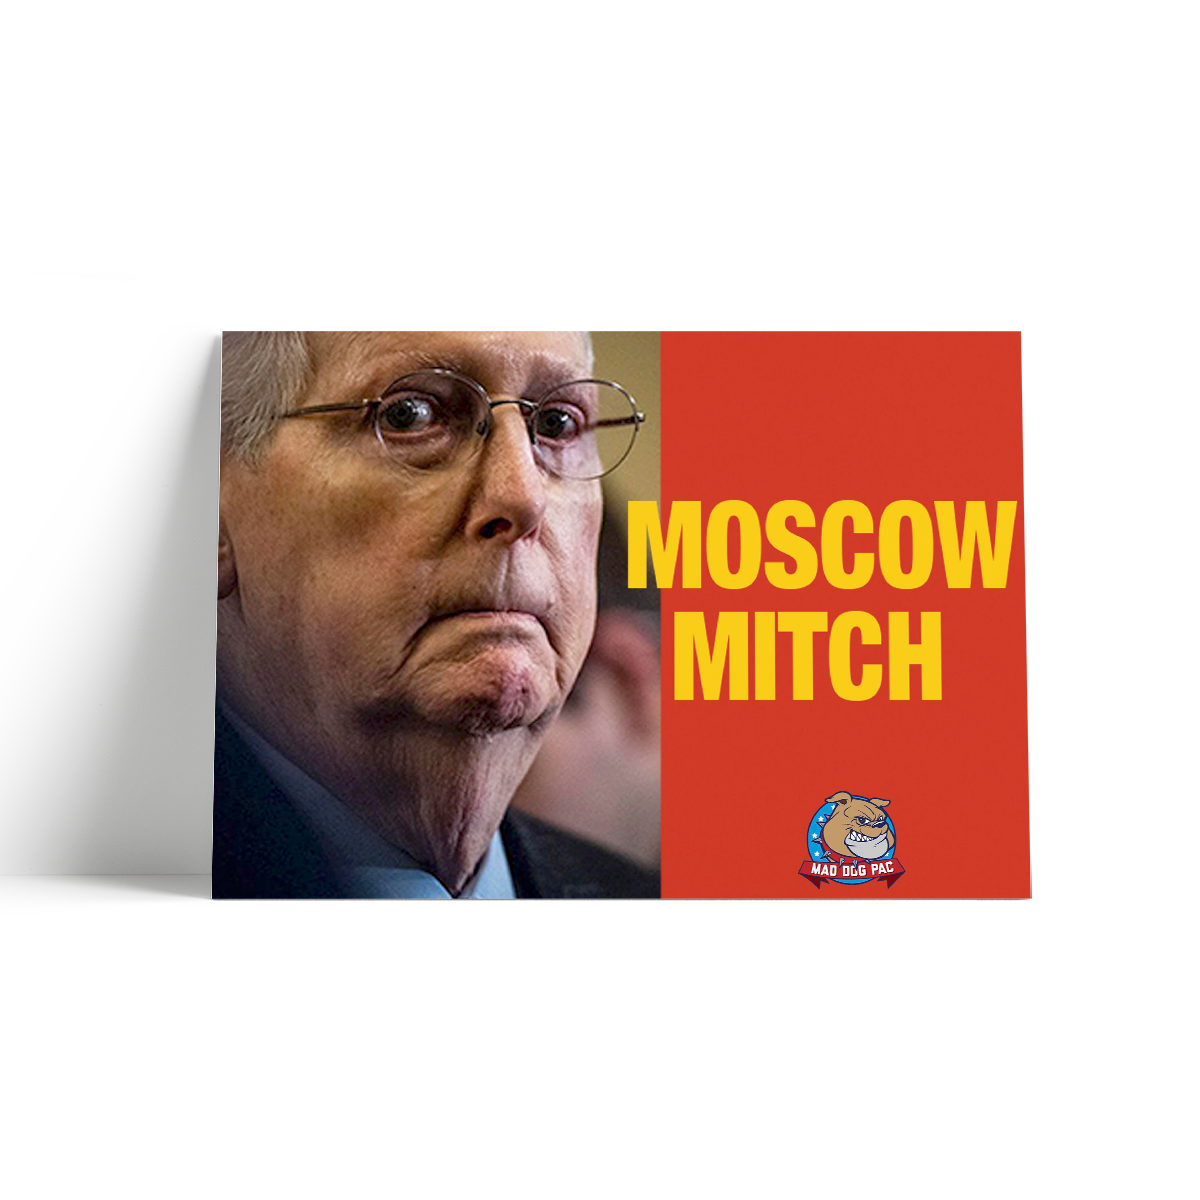 Moscow Mitch Poster - Free Download!